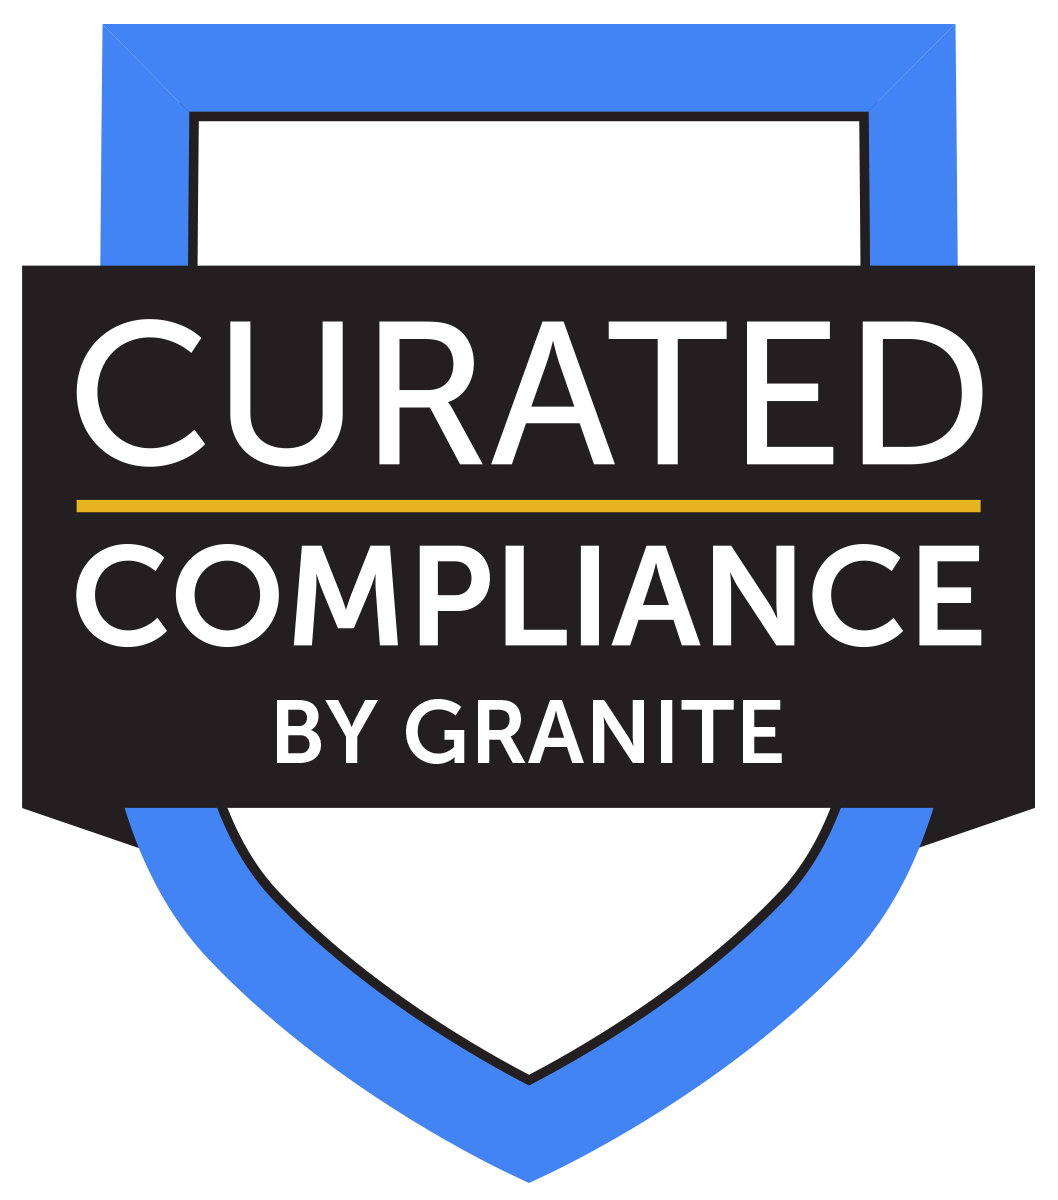 Curated Compliance